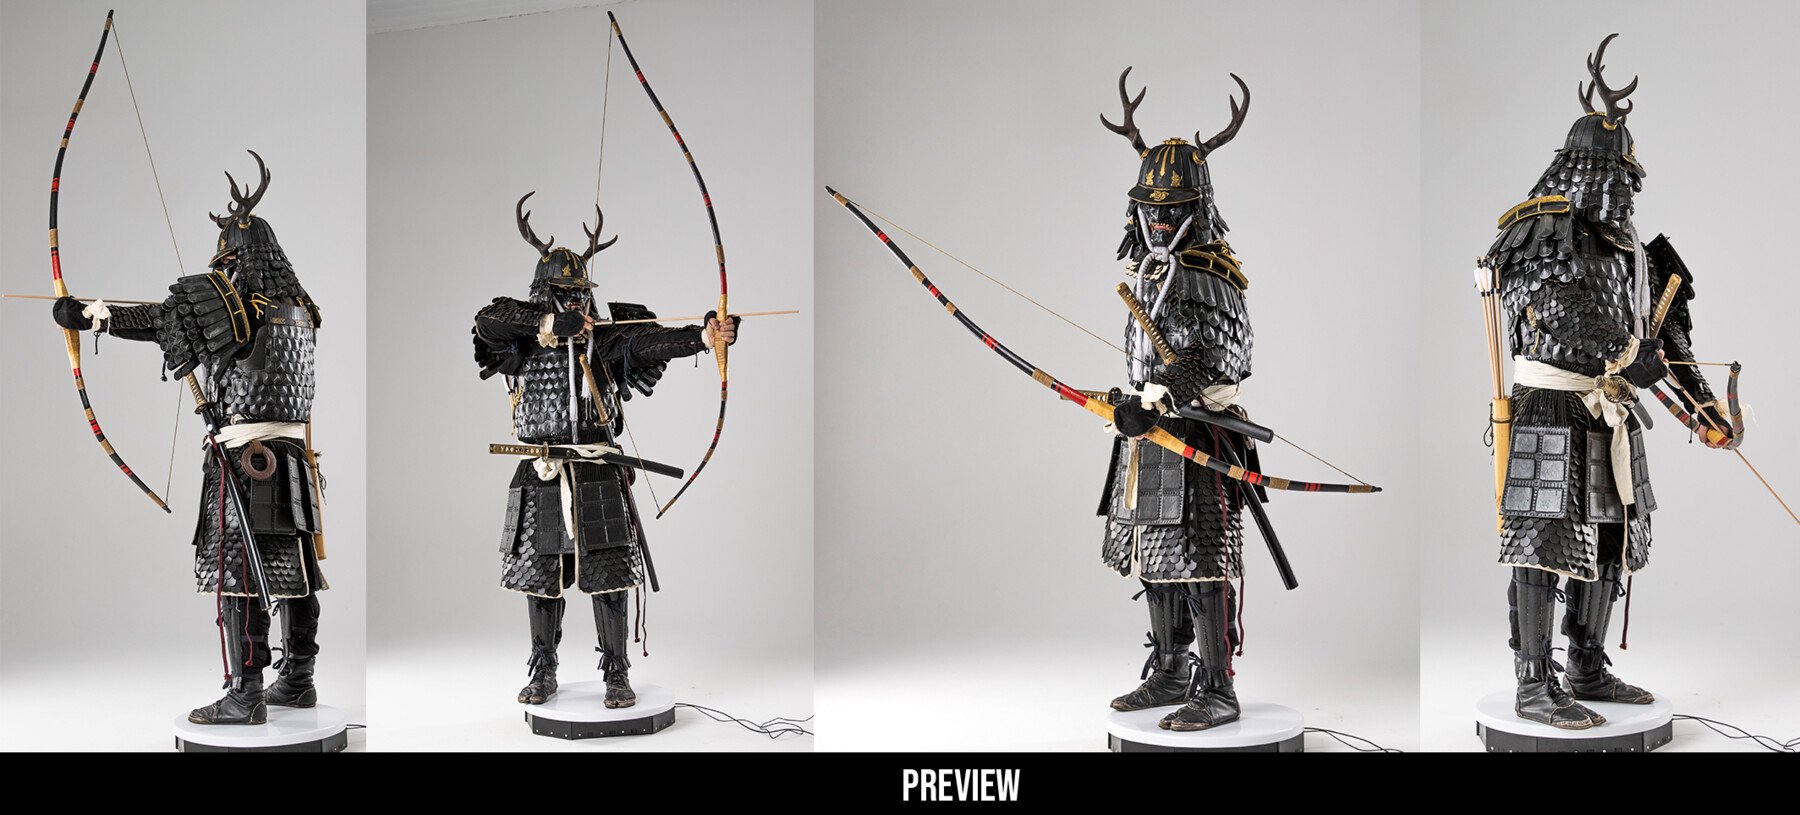 1200+ Samurai Reference Pictures